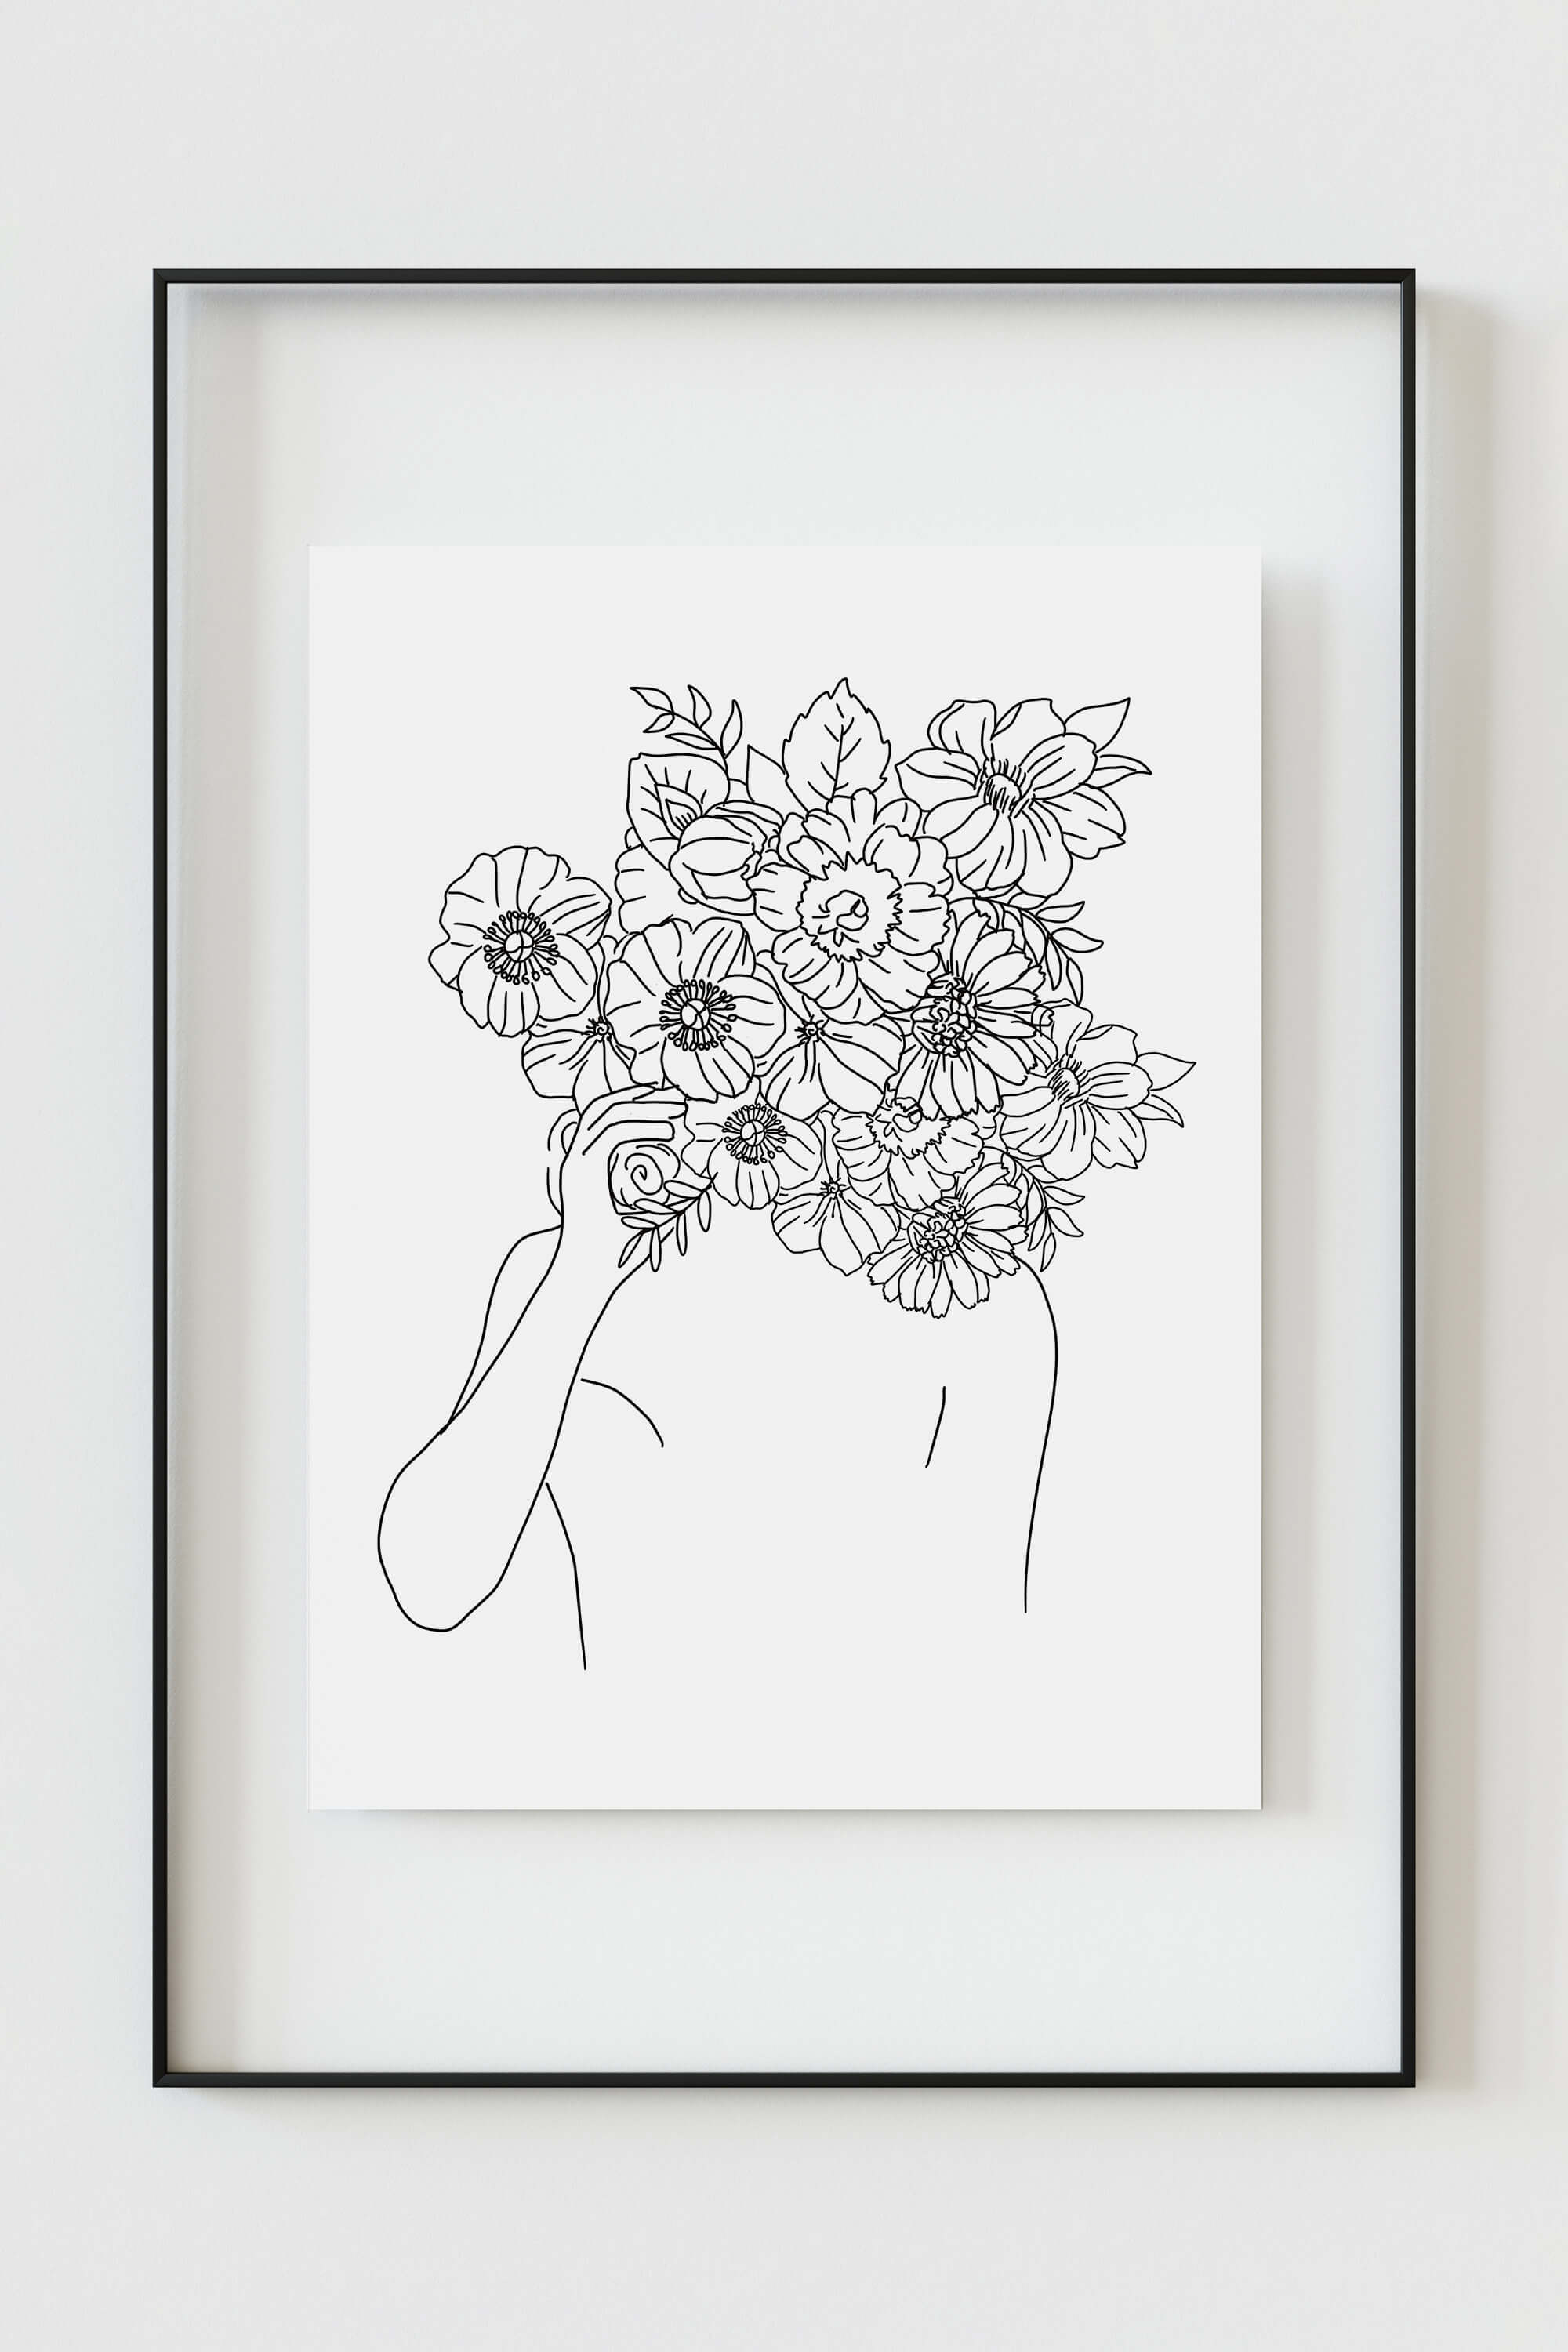 A boho-chic wall art piece depicting a feminine face with intricate flower details – a captivating illustration in black and white, bringing a touch of nature to your space.